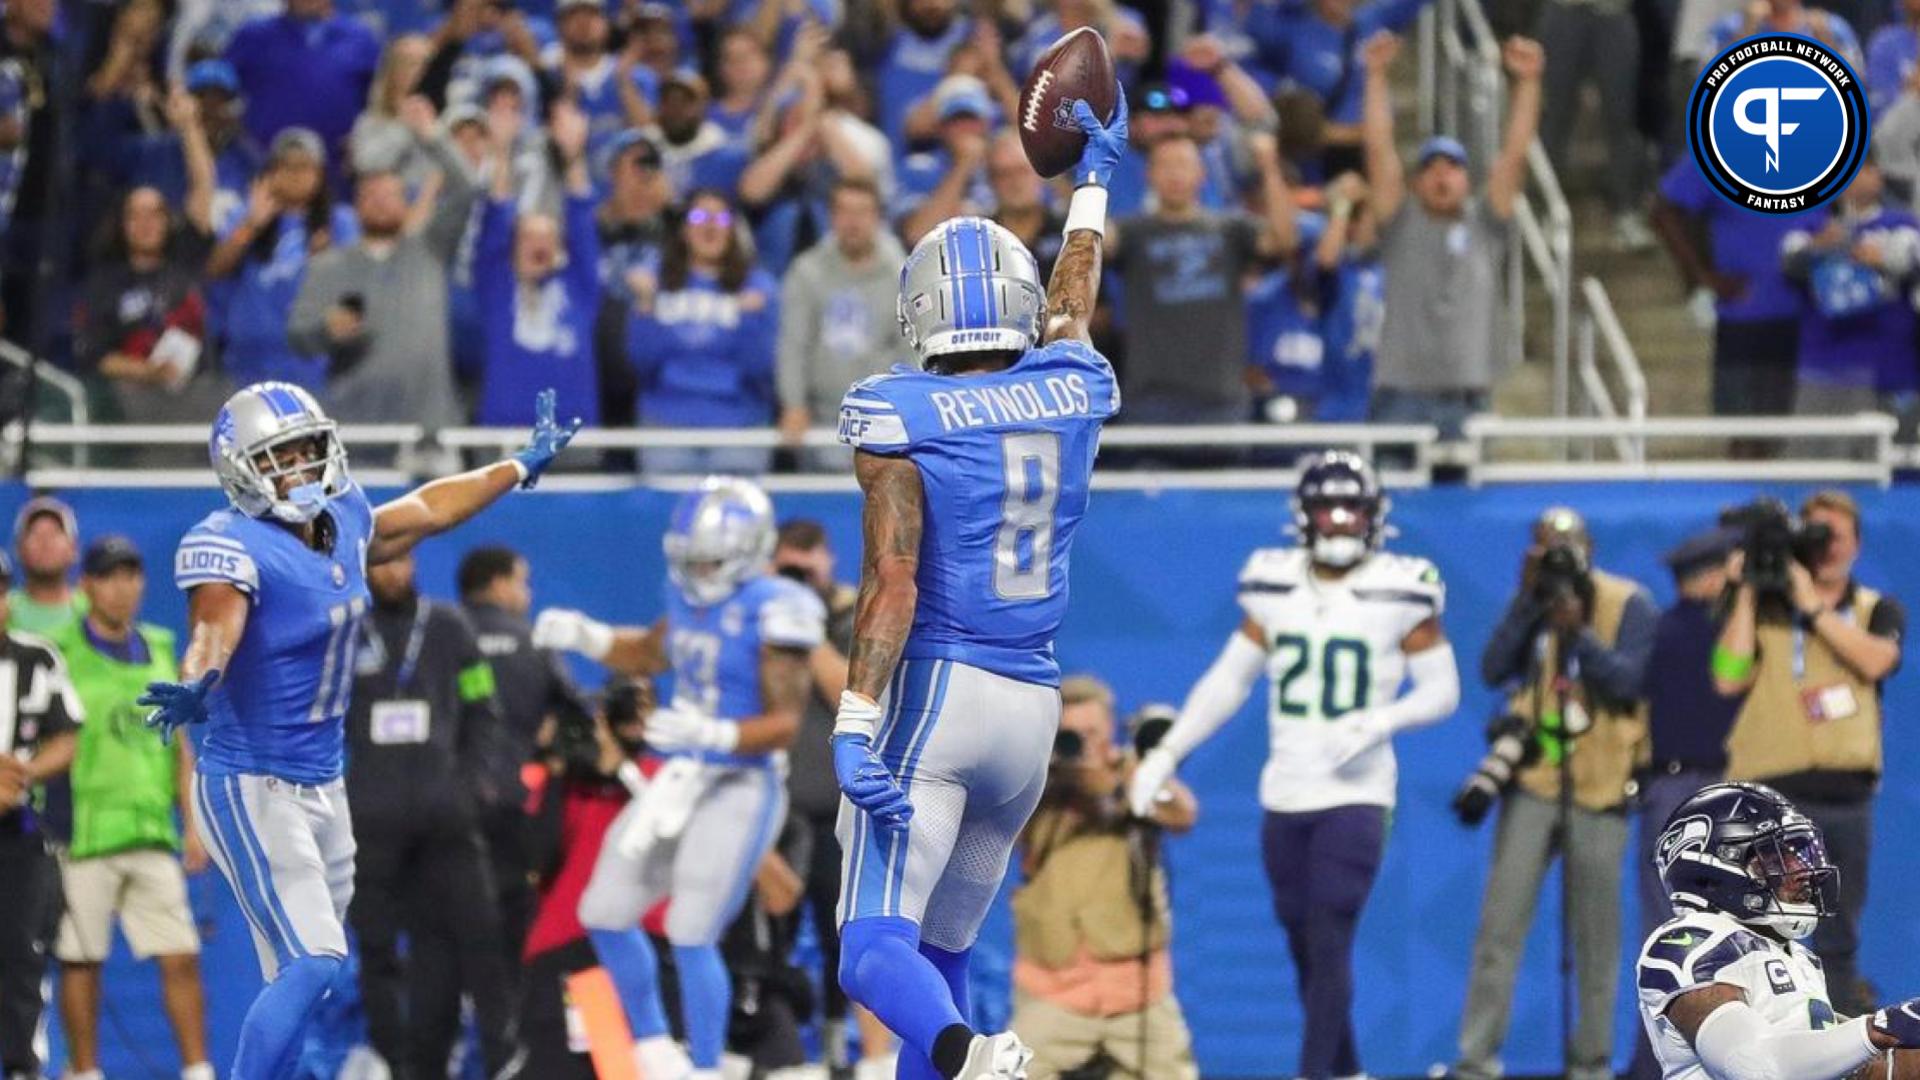 Josh Reynolds Fantasy Waiver Wire: Should I Pick Up Lions WR This Week?